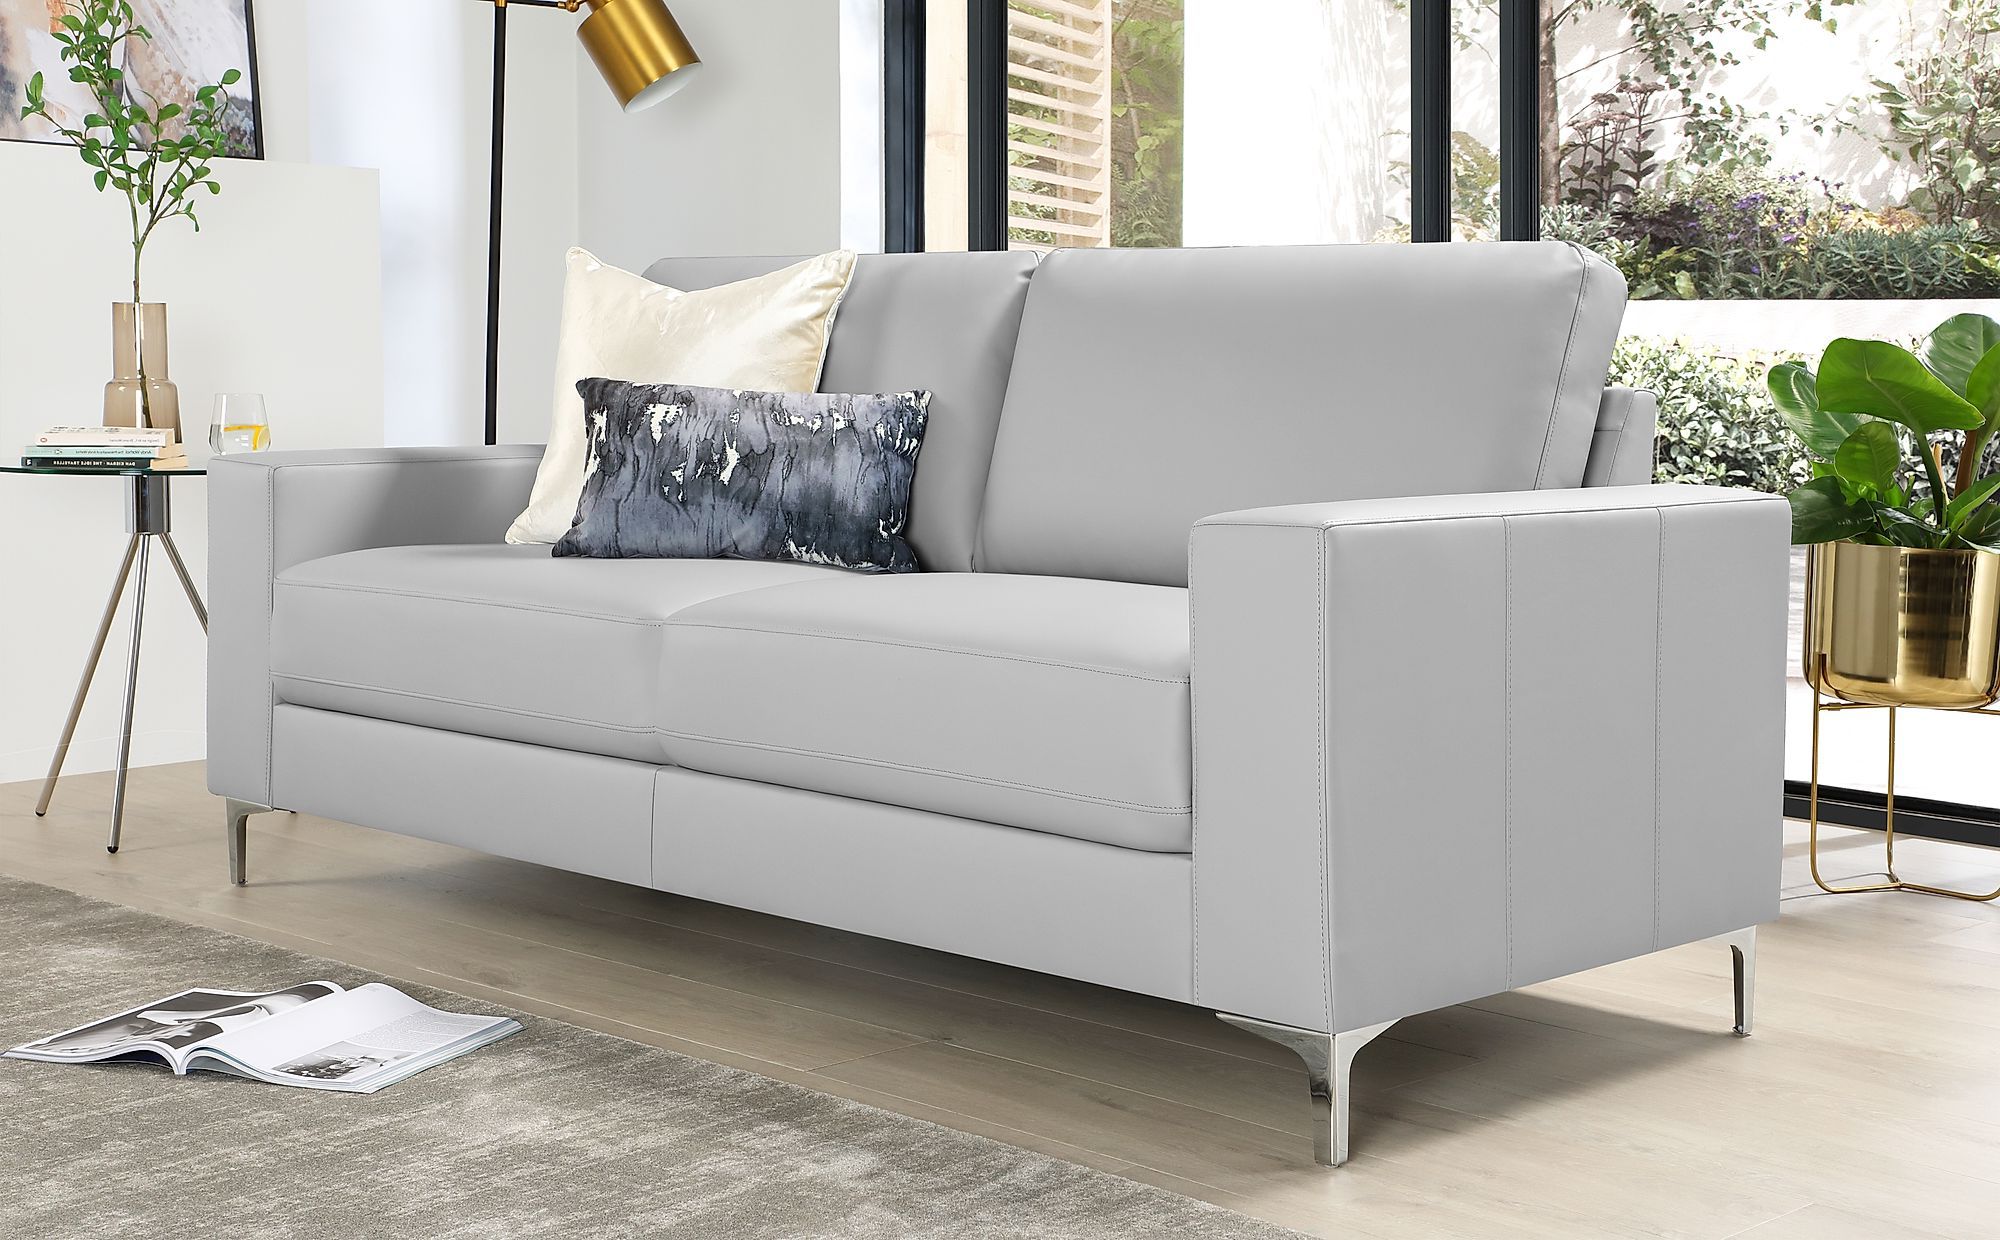 Modern Light Grey Loveseat Sofas Within Most Recently Released Baltimore Light Grey Leather 3 Seater Sofa (View 4 of 15)